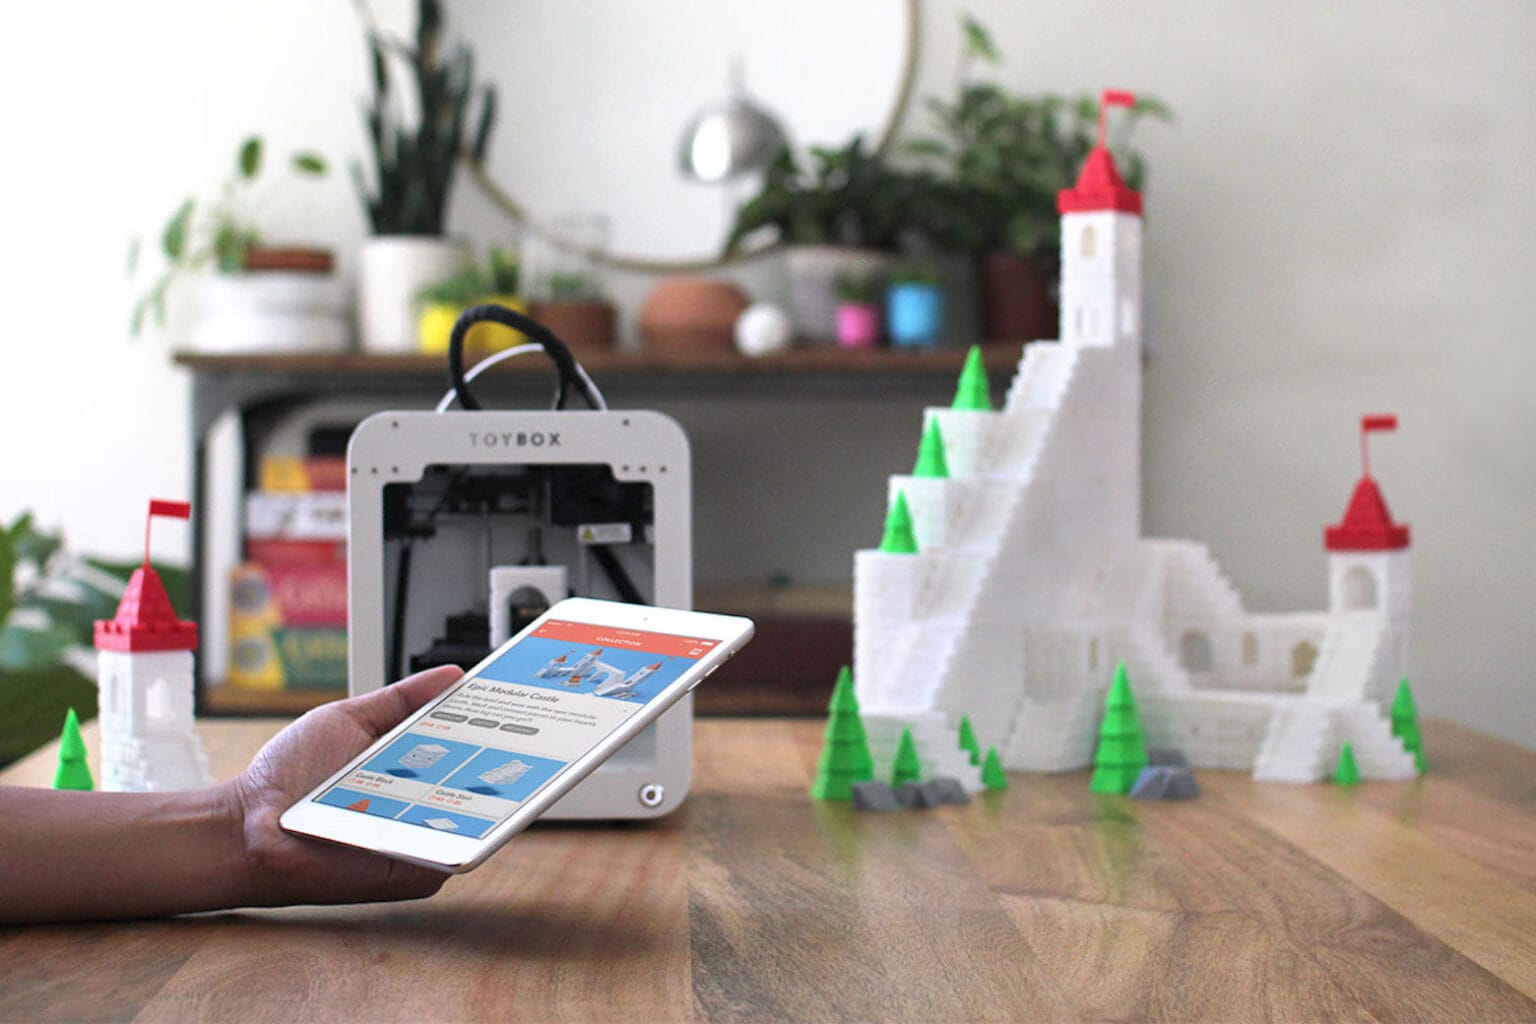 Make toys for your kids (or yourself) with this easy 3D printer.